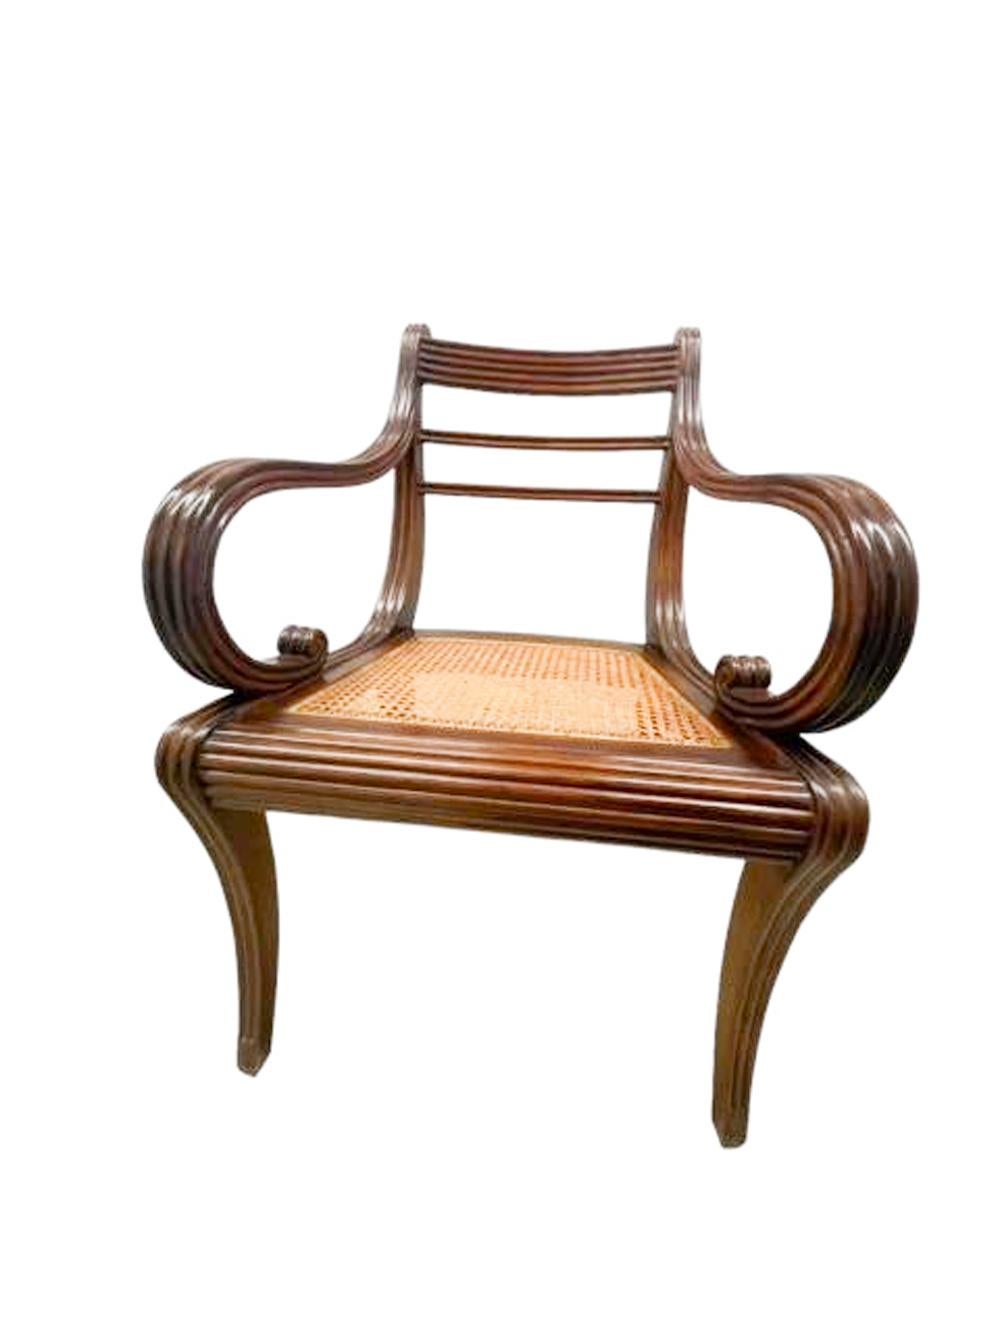 Pair of Anglo-Indian Mahogany Armchairs with Reeded Detail and Caned Seats  For Sale 3